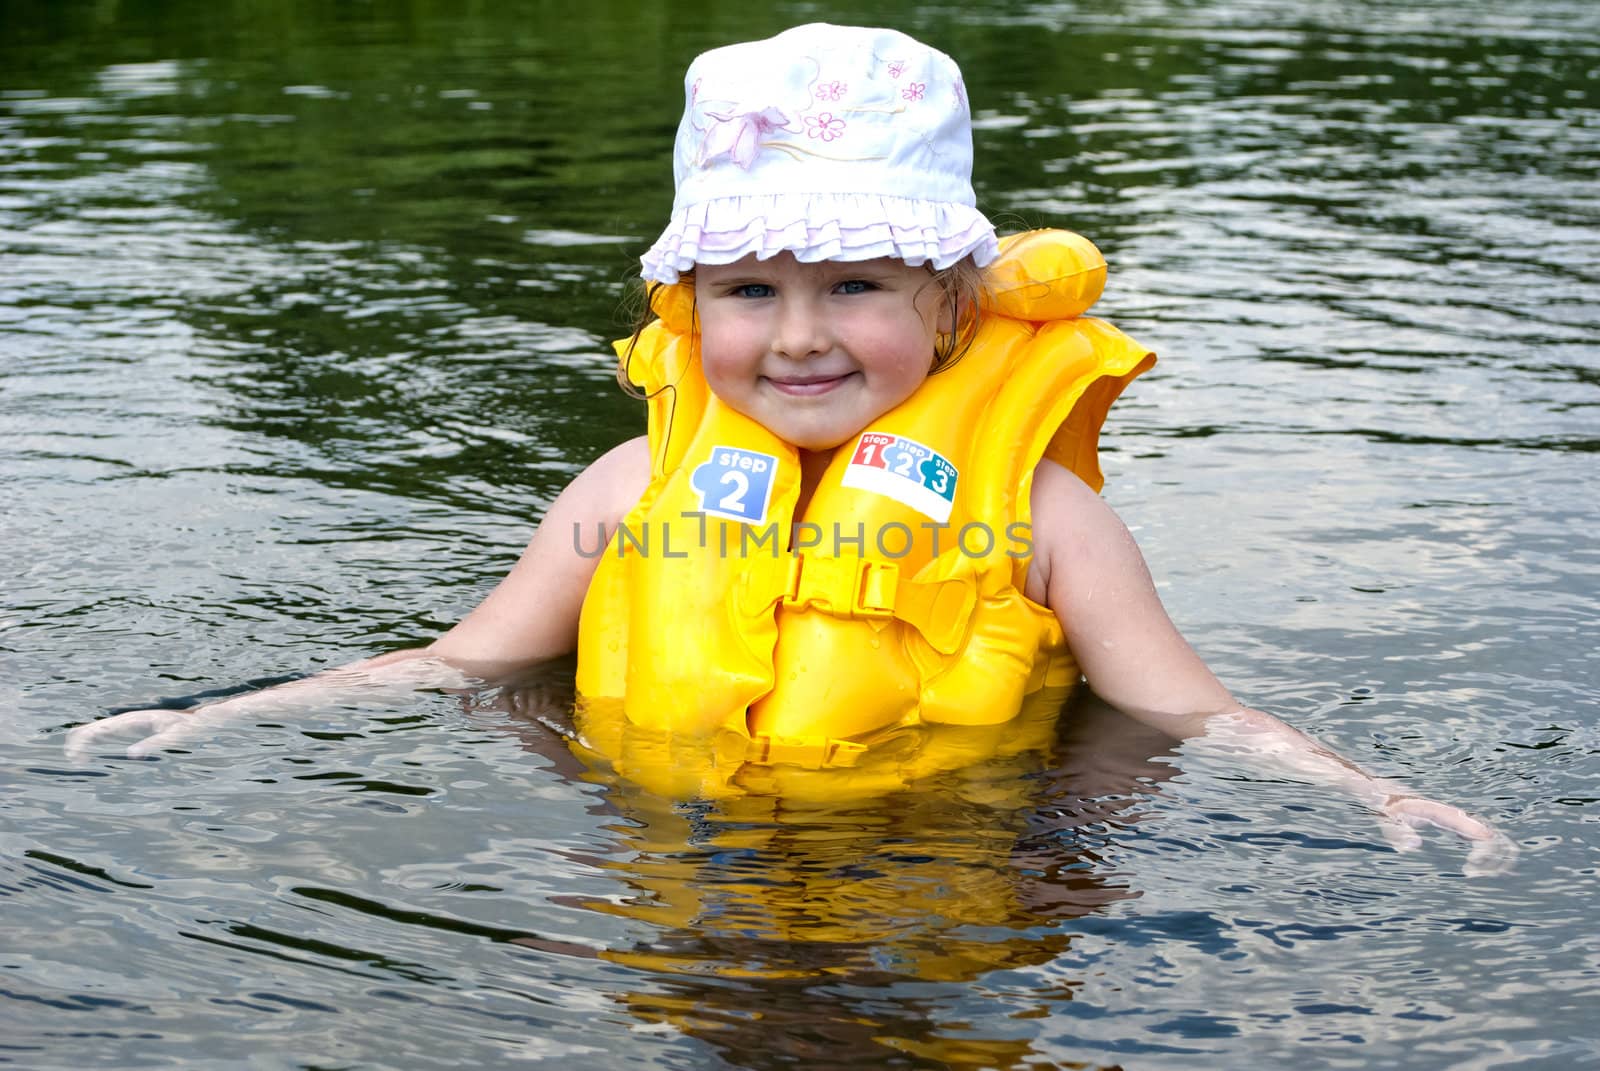 The child dressed in a life jacket studies to float